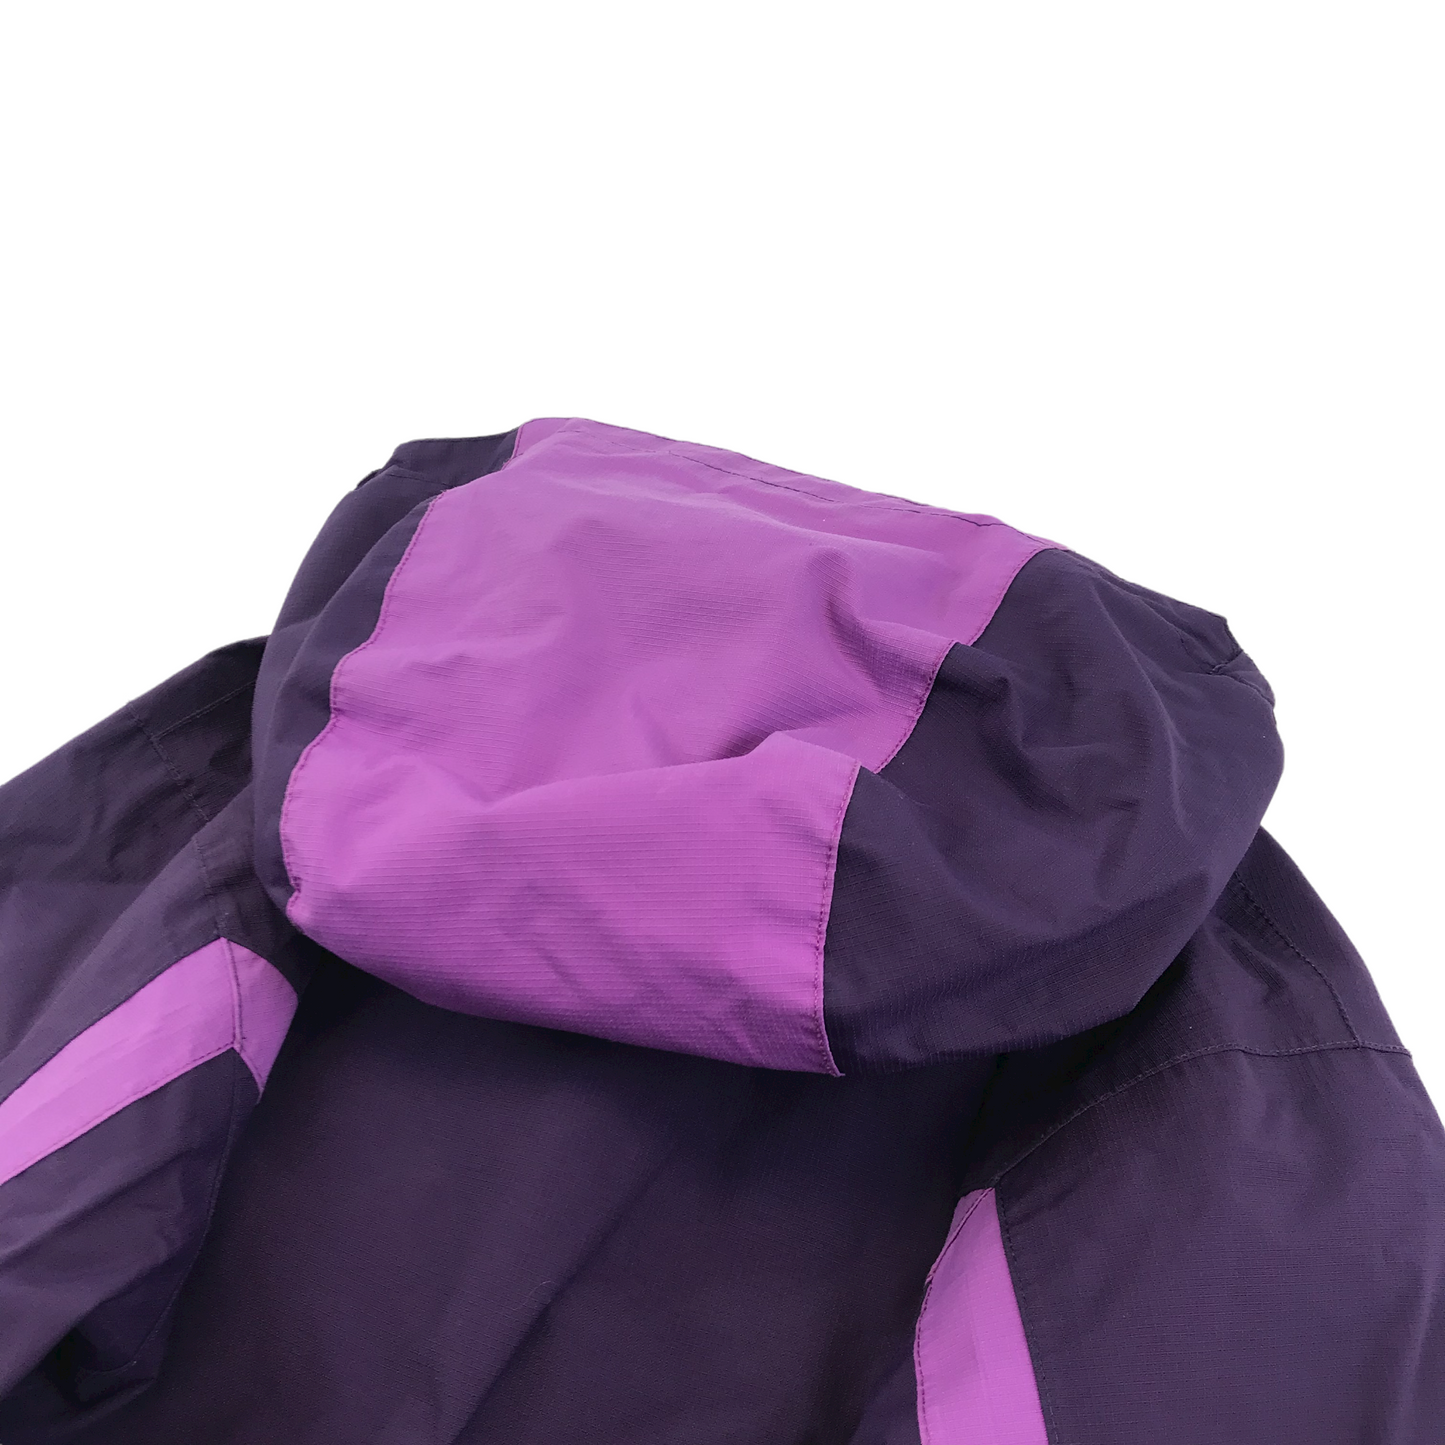 Mountainlife Purple 3-in-1 Jacket Age 7